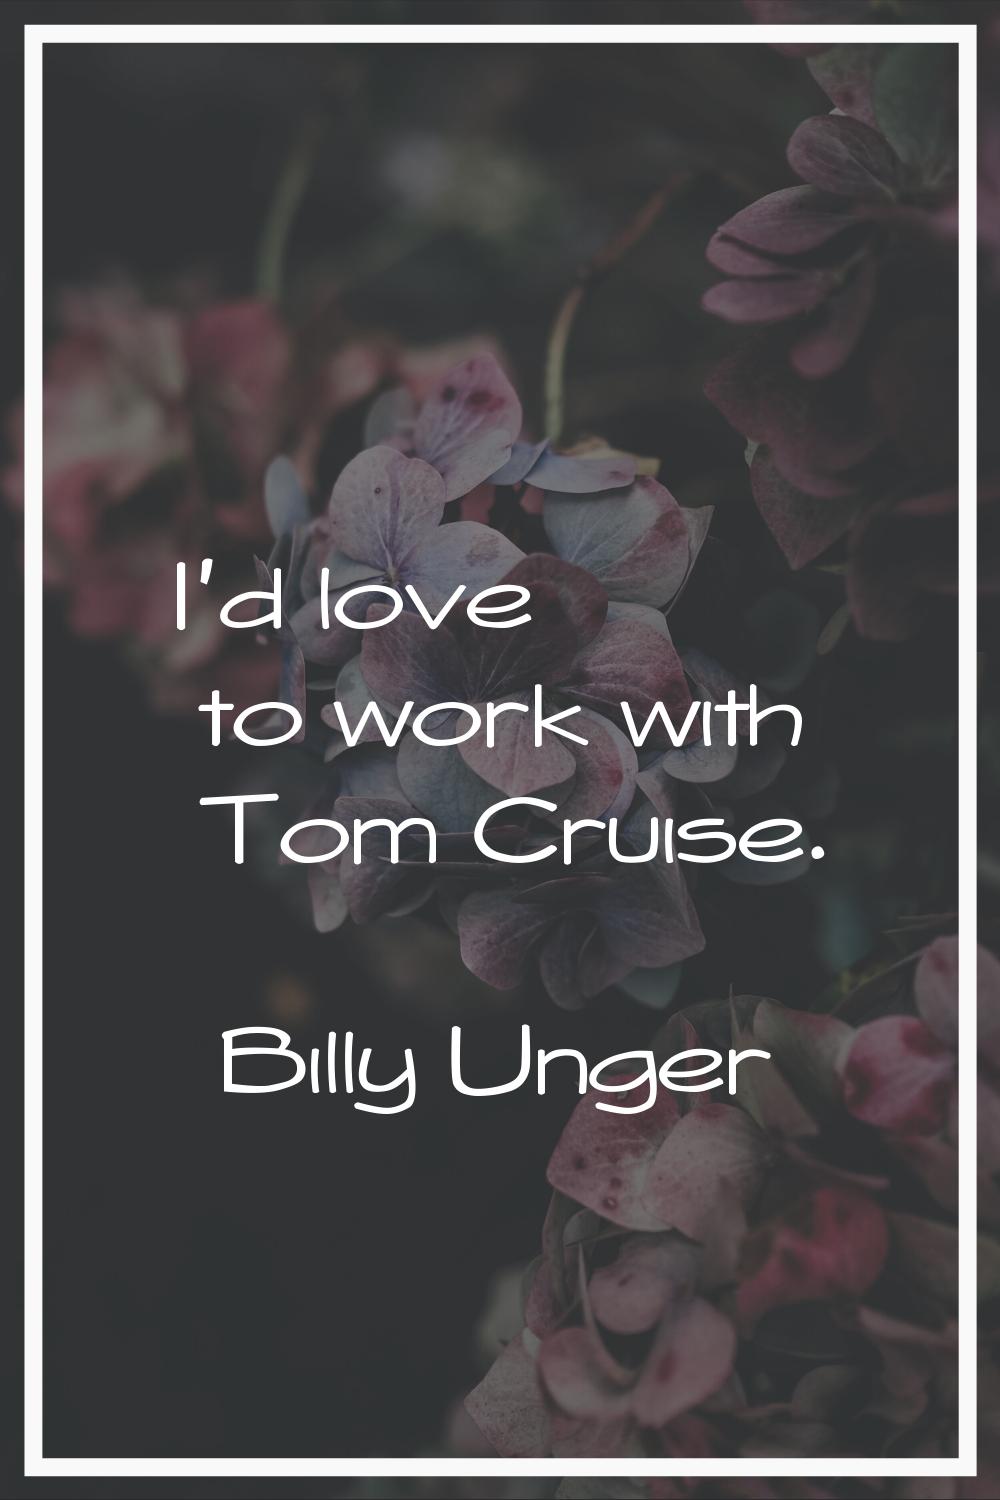 I'd love to work with Tom Cruise.